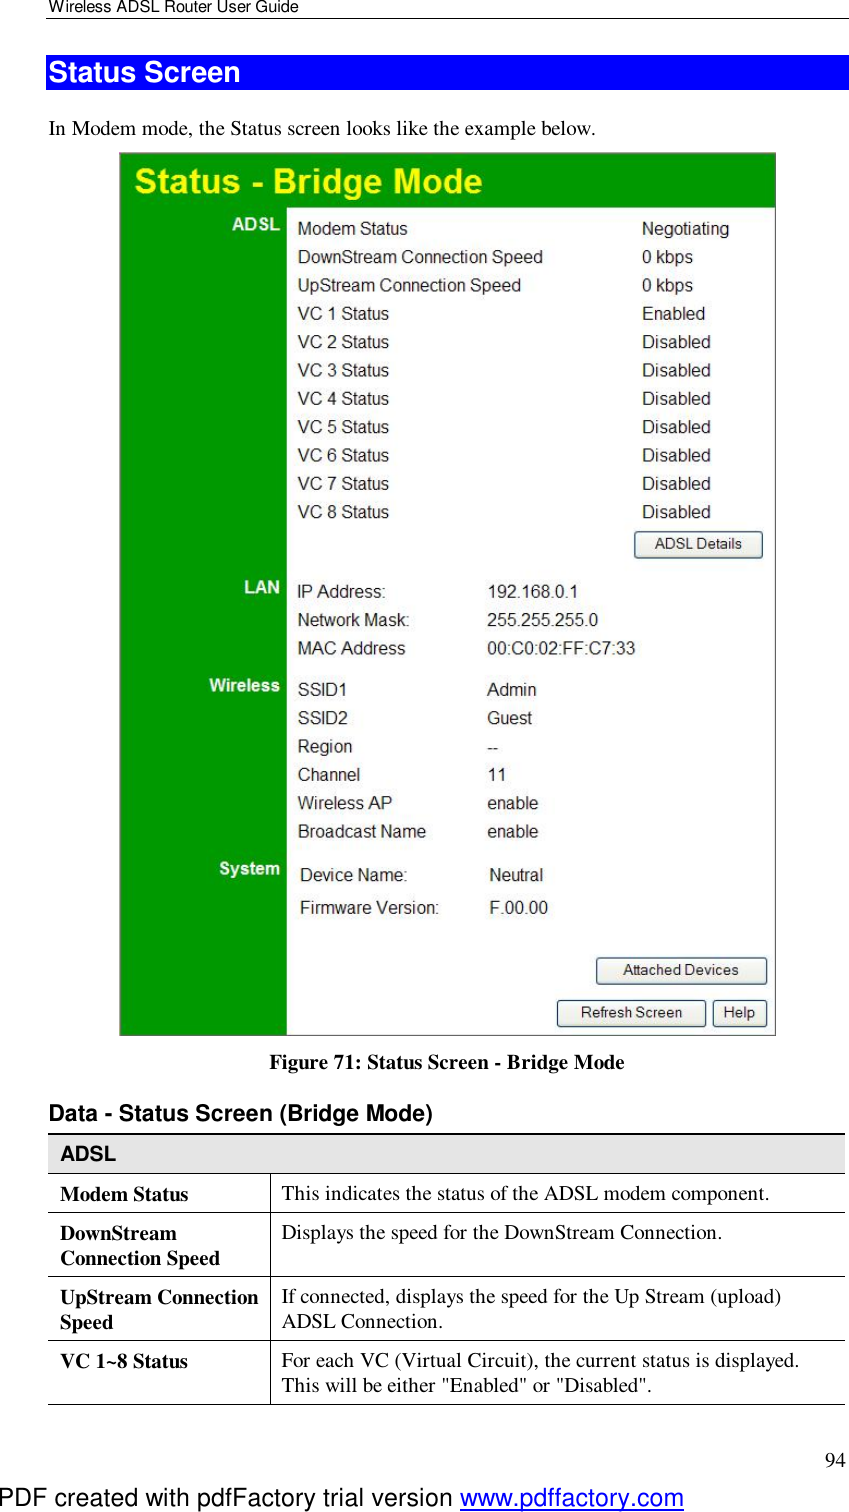 Wireless ADSL Router User Guide 94 Status Screen In Modem mode, the Status screen looks like the example below.  Figure 71: Status Screen - Bridge Mode Data - Status Screen (Bridge Mode) ADSL Modem Status  This indicates the status of the ADSL modem component. DownStream Connection Speed  Displays the speed for the DownStream Connection. UpStream Connection Speed  If connected, displays the speed for the Up Stream (upload) ADSL Connection. VC 1~8 Status  For each VC (Virtual Circuit), the current status is displayed. This will be either &quot;Enabled&quot; or &quot;Disabled&quot;.  PDF created with pdfFactory trial version www.pdffactory.com